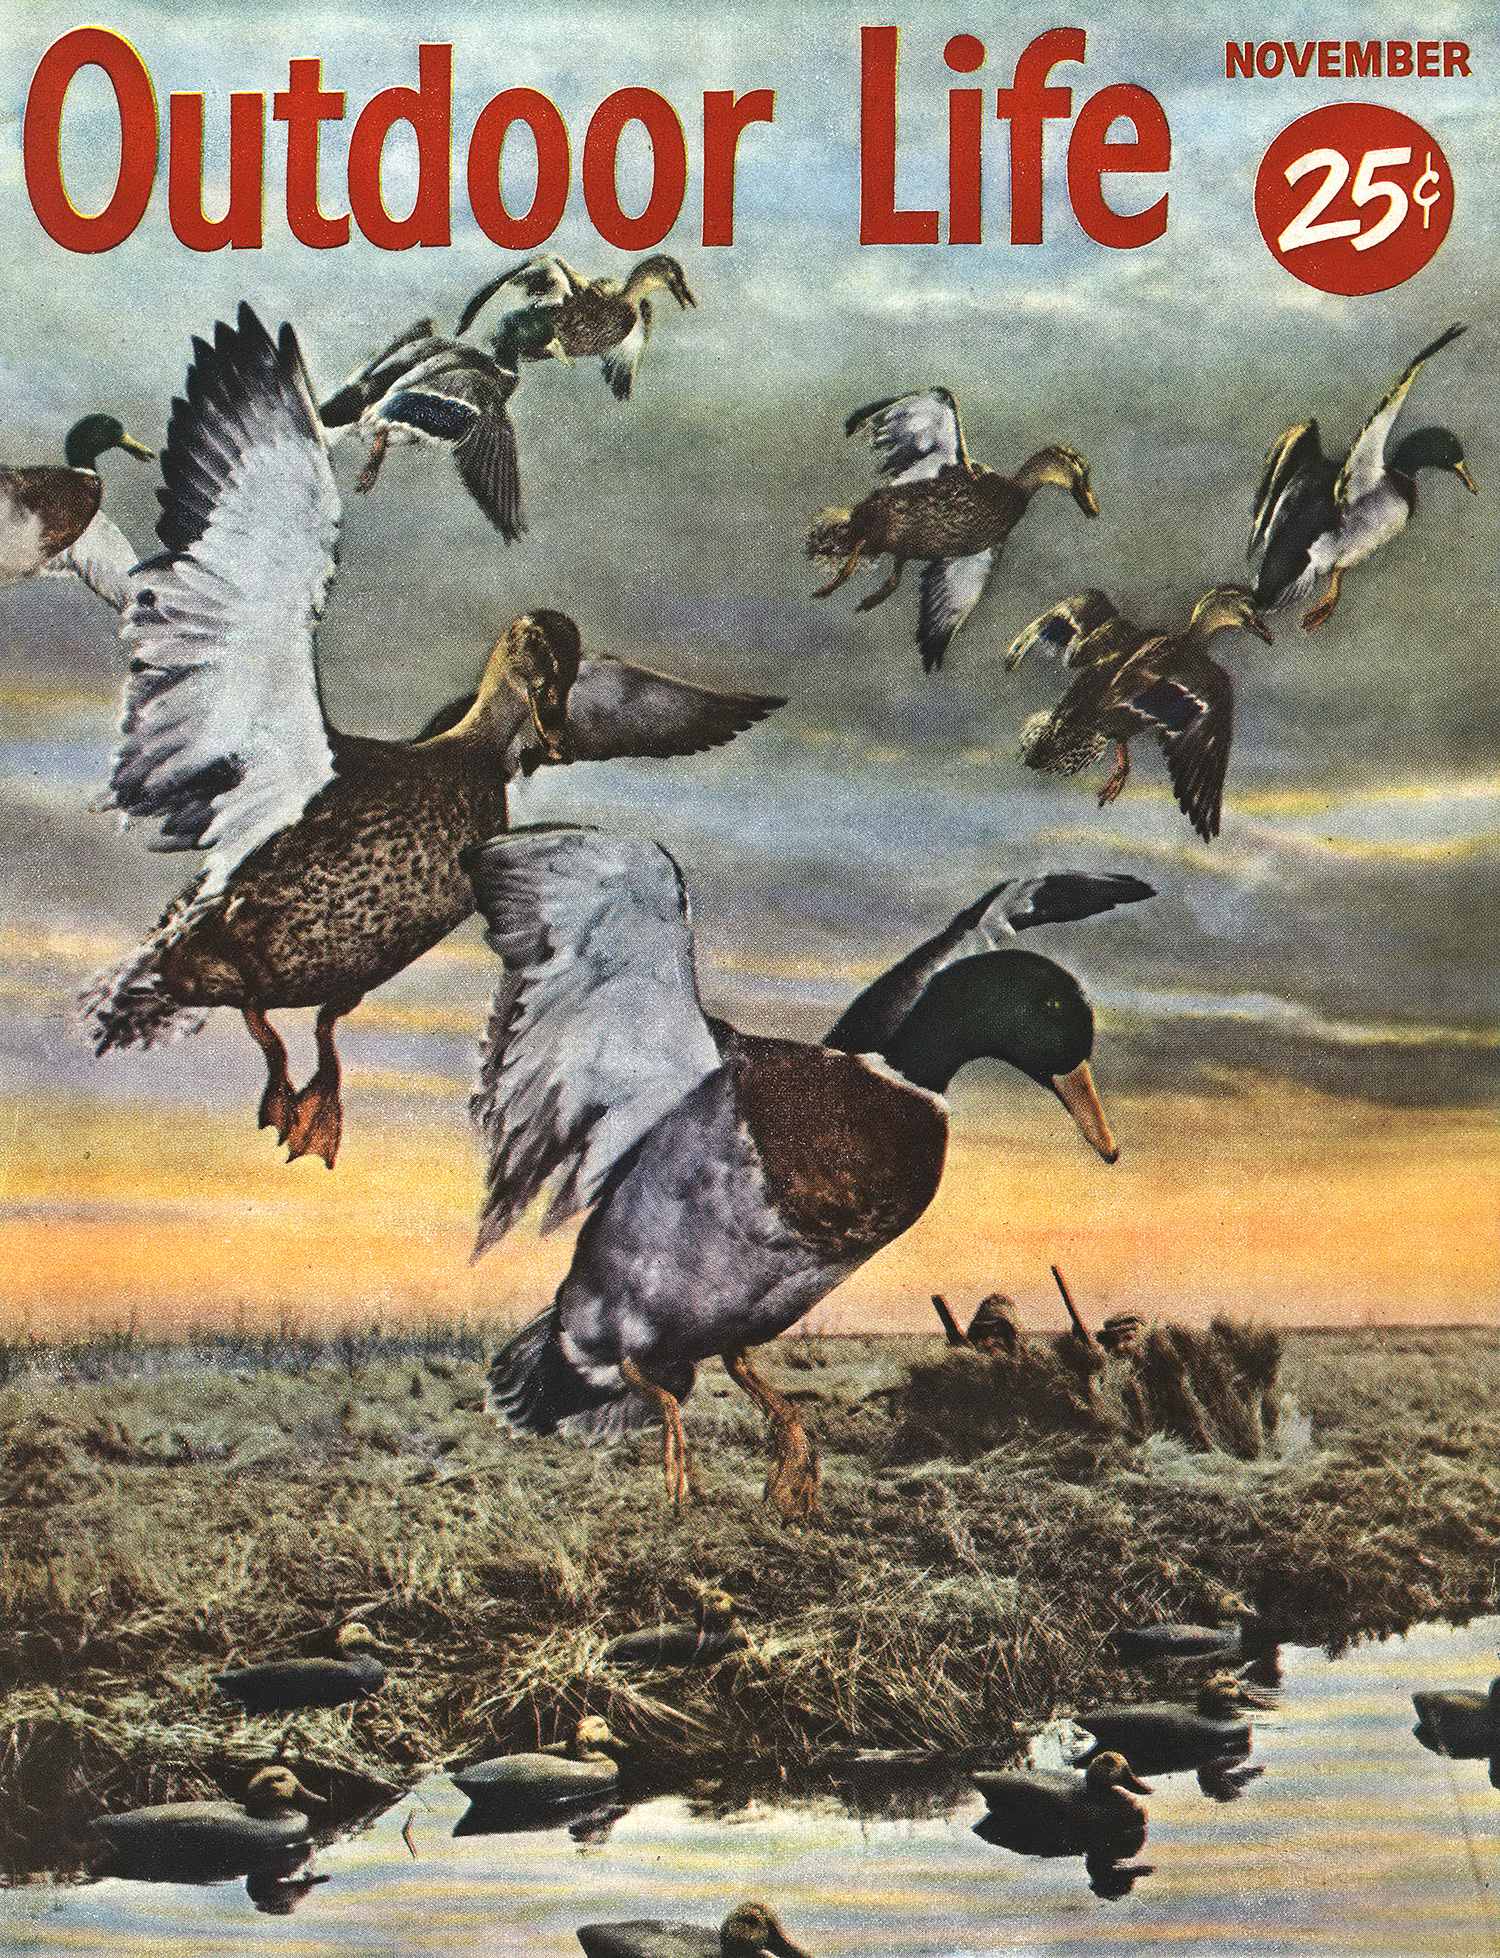 Outdoor Life cover with mallards coming in to land, November 1953